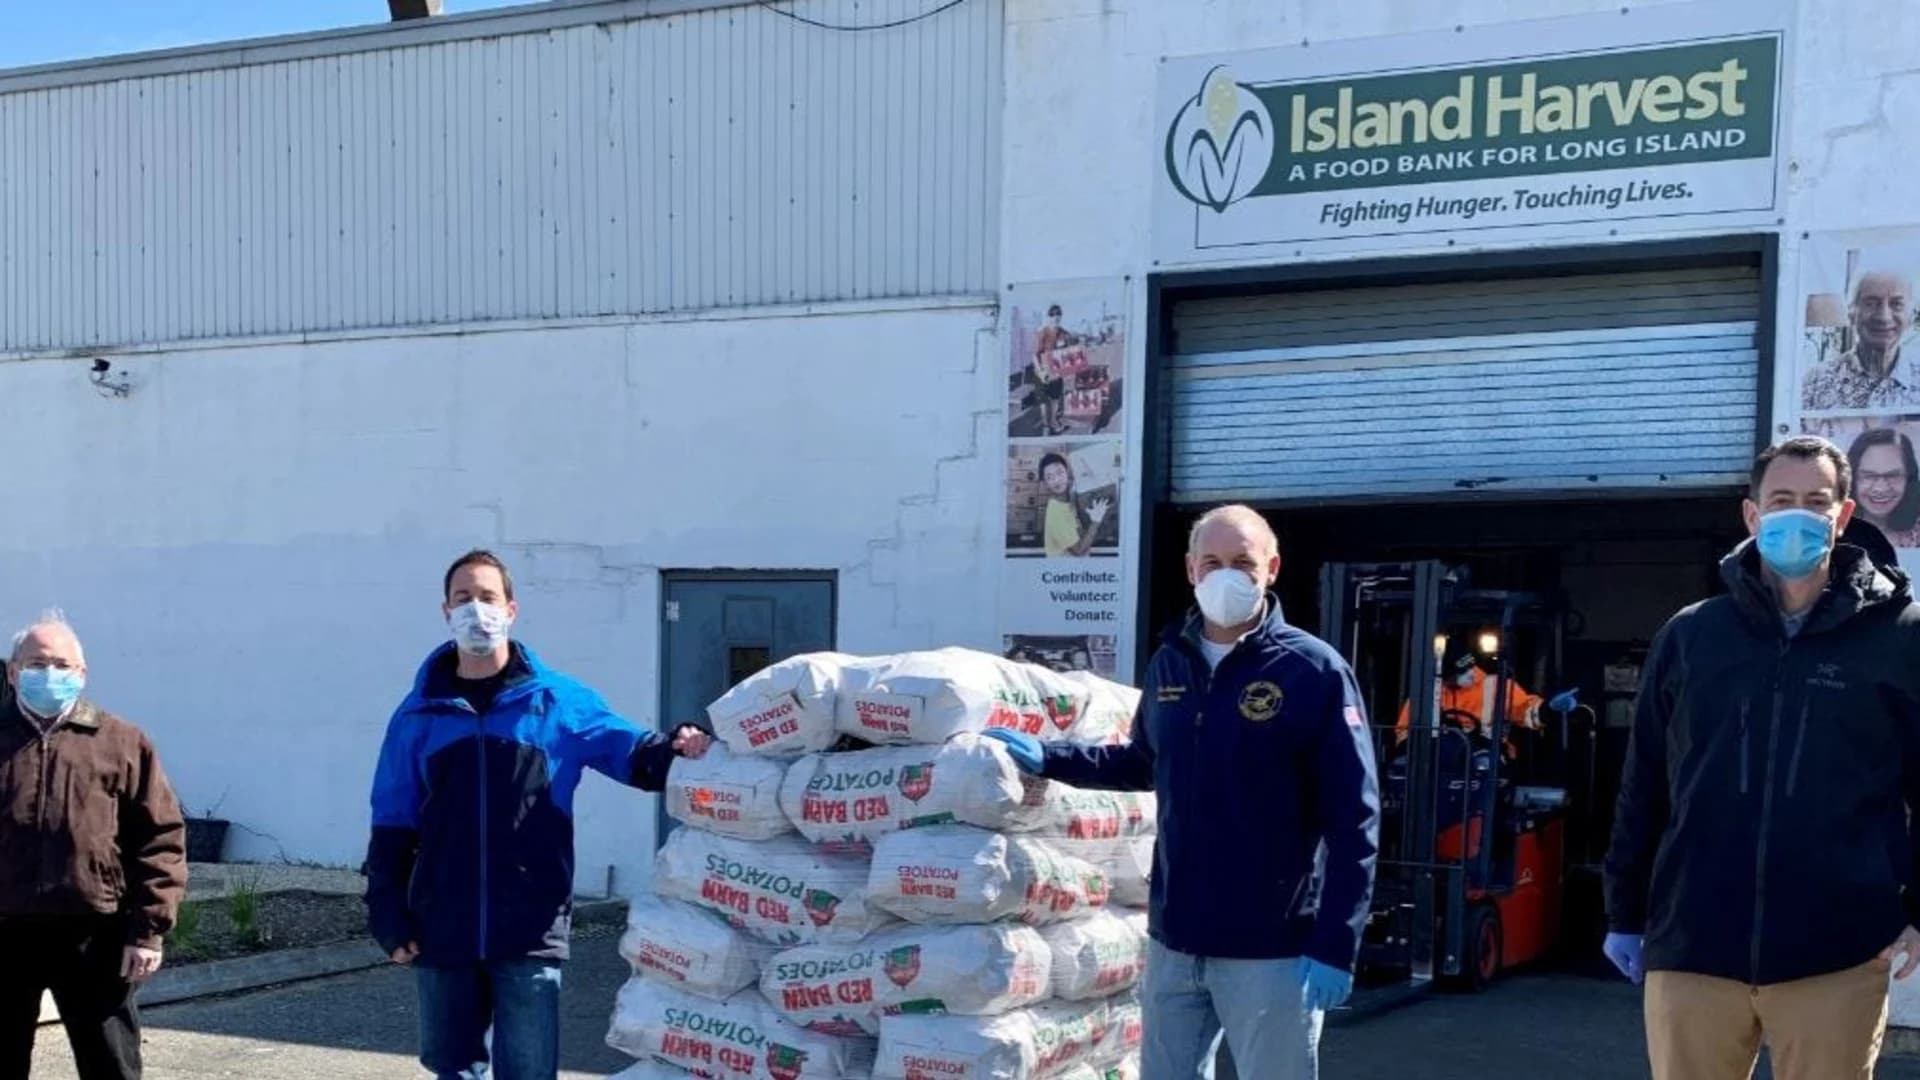 Farmingdale-based grower donates 30,000 pounds of potatoes to Island Harvest